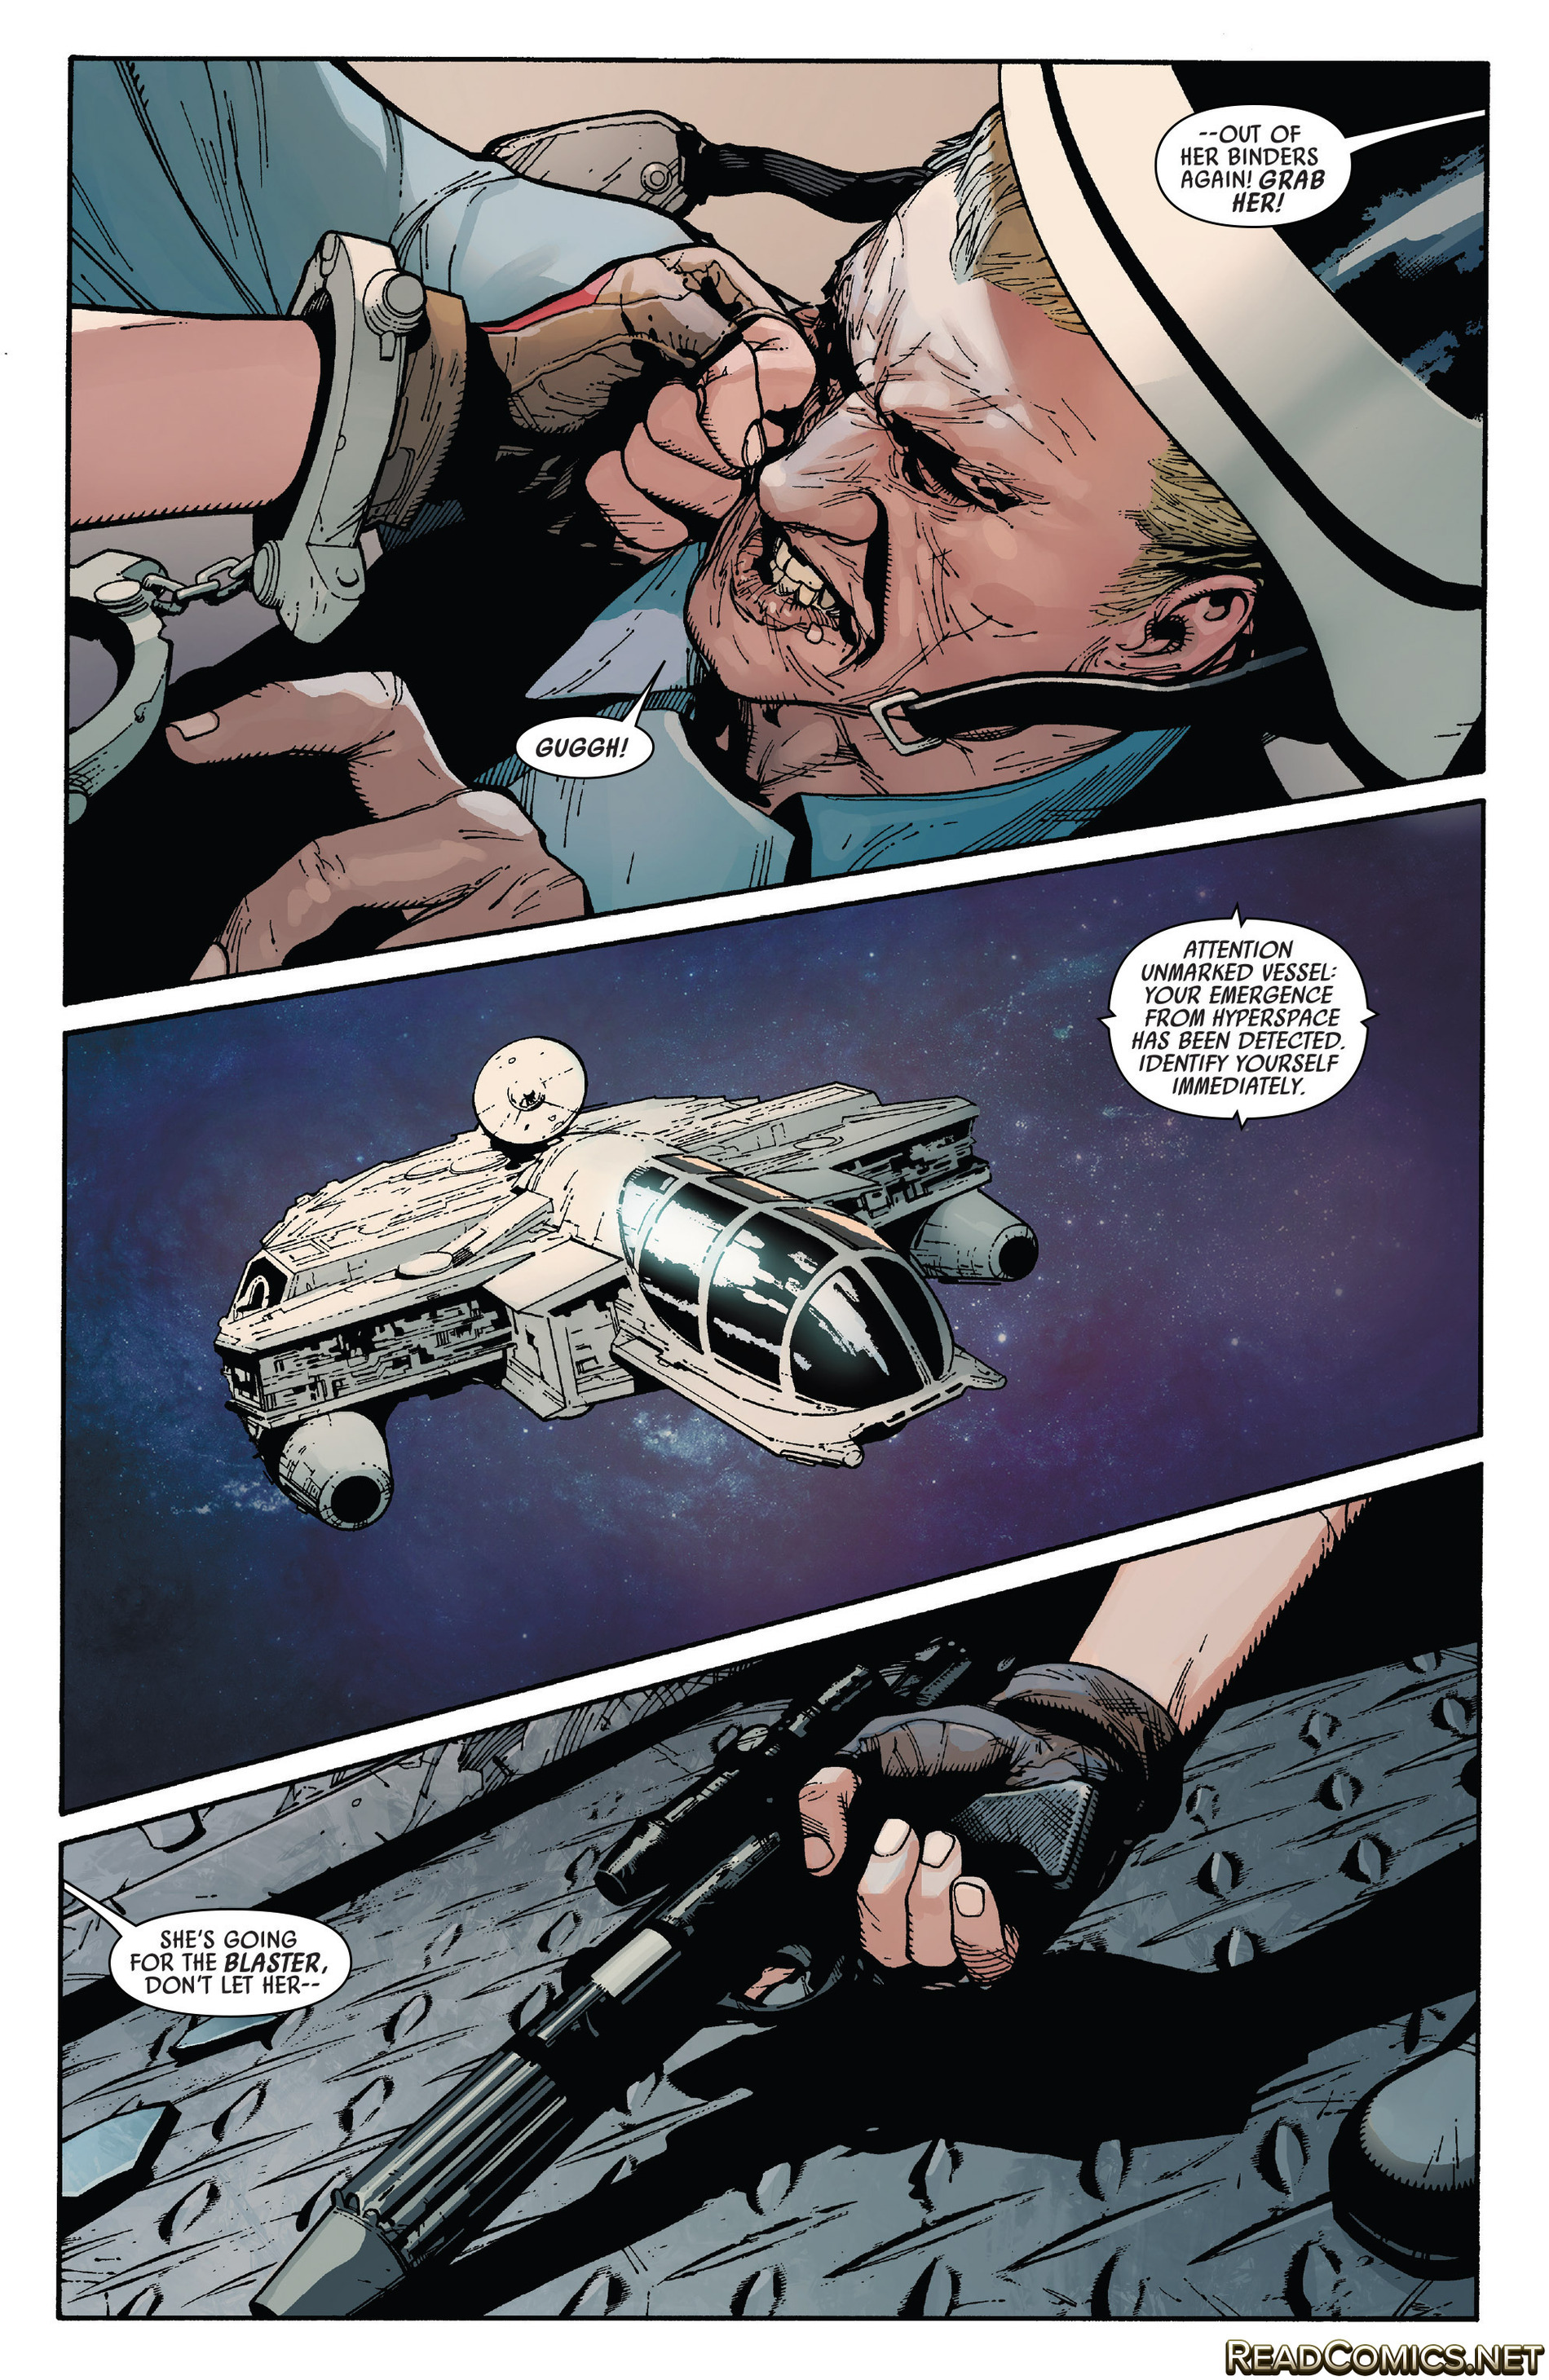 Star Wars (2015-): Chapter 16 - Page 3